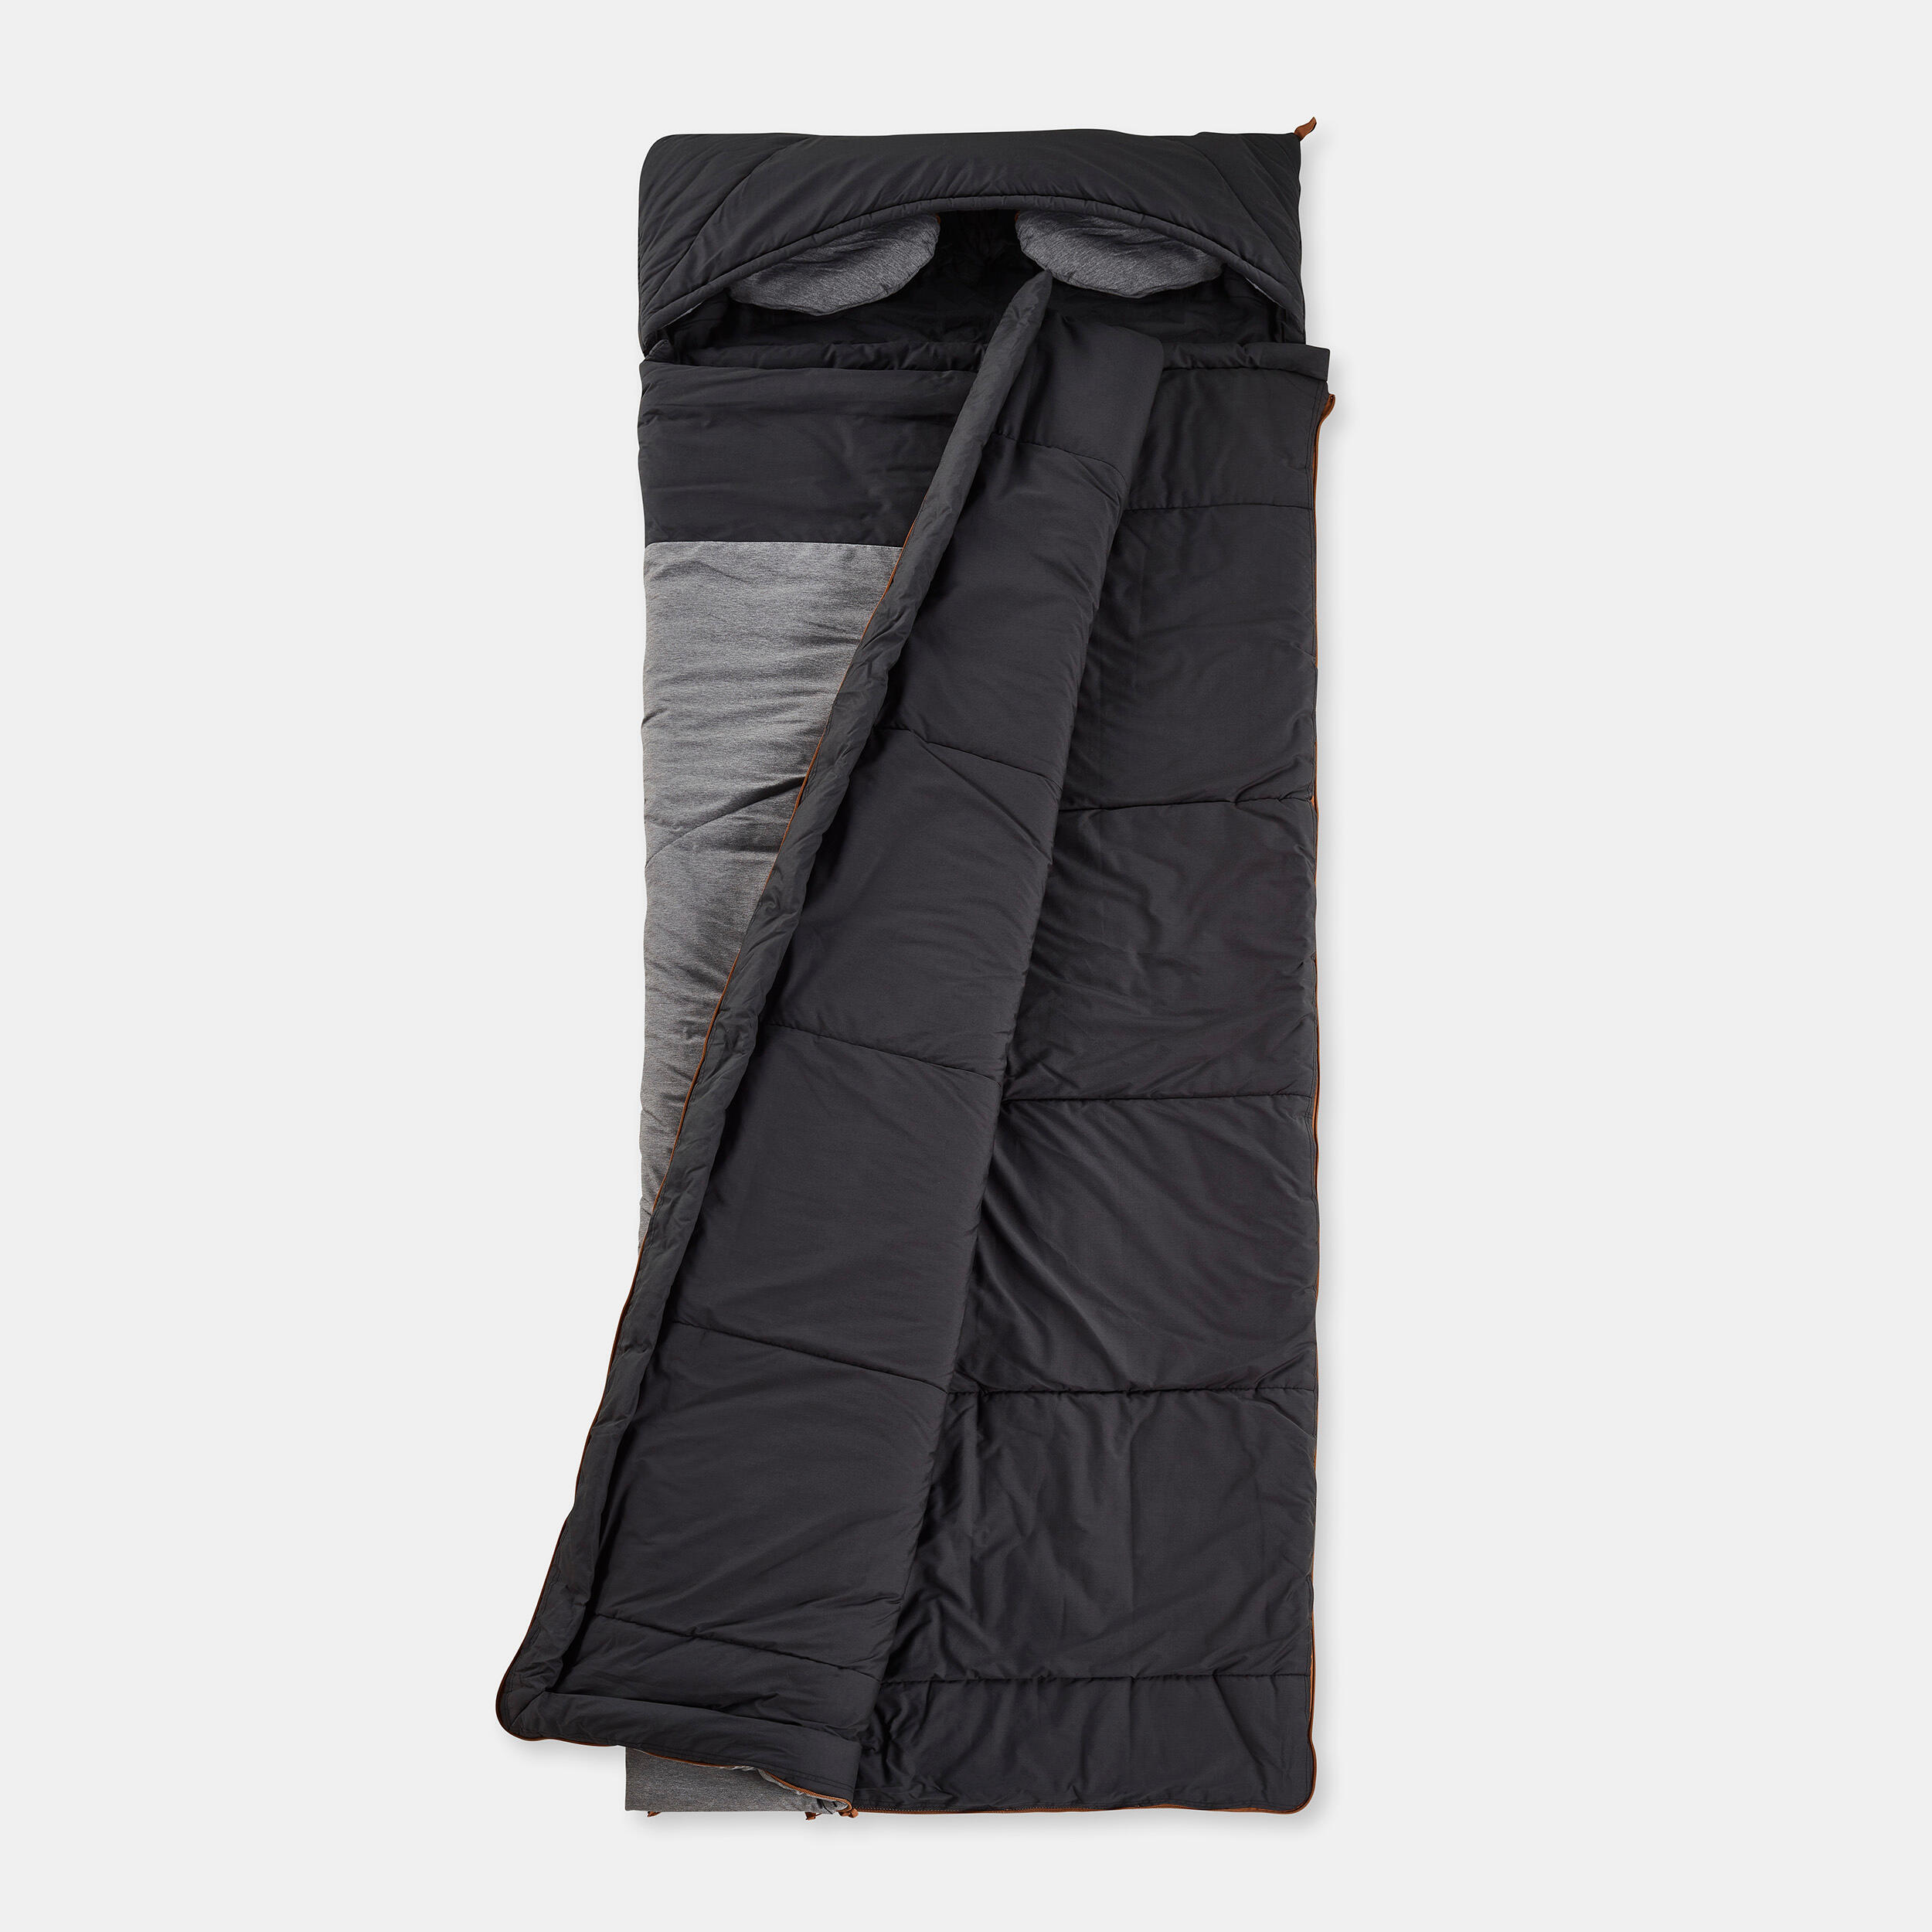 COTTON SLEEPING BAG FOR CAMPING - ARPENAZ 0° COTTON 4/6